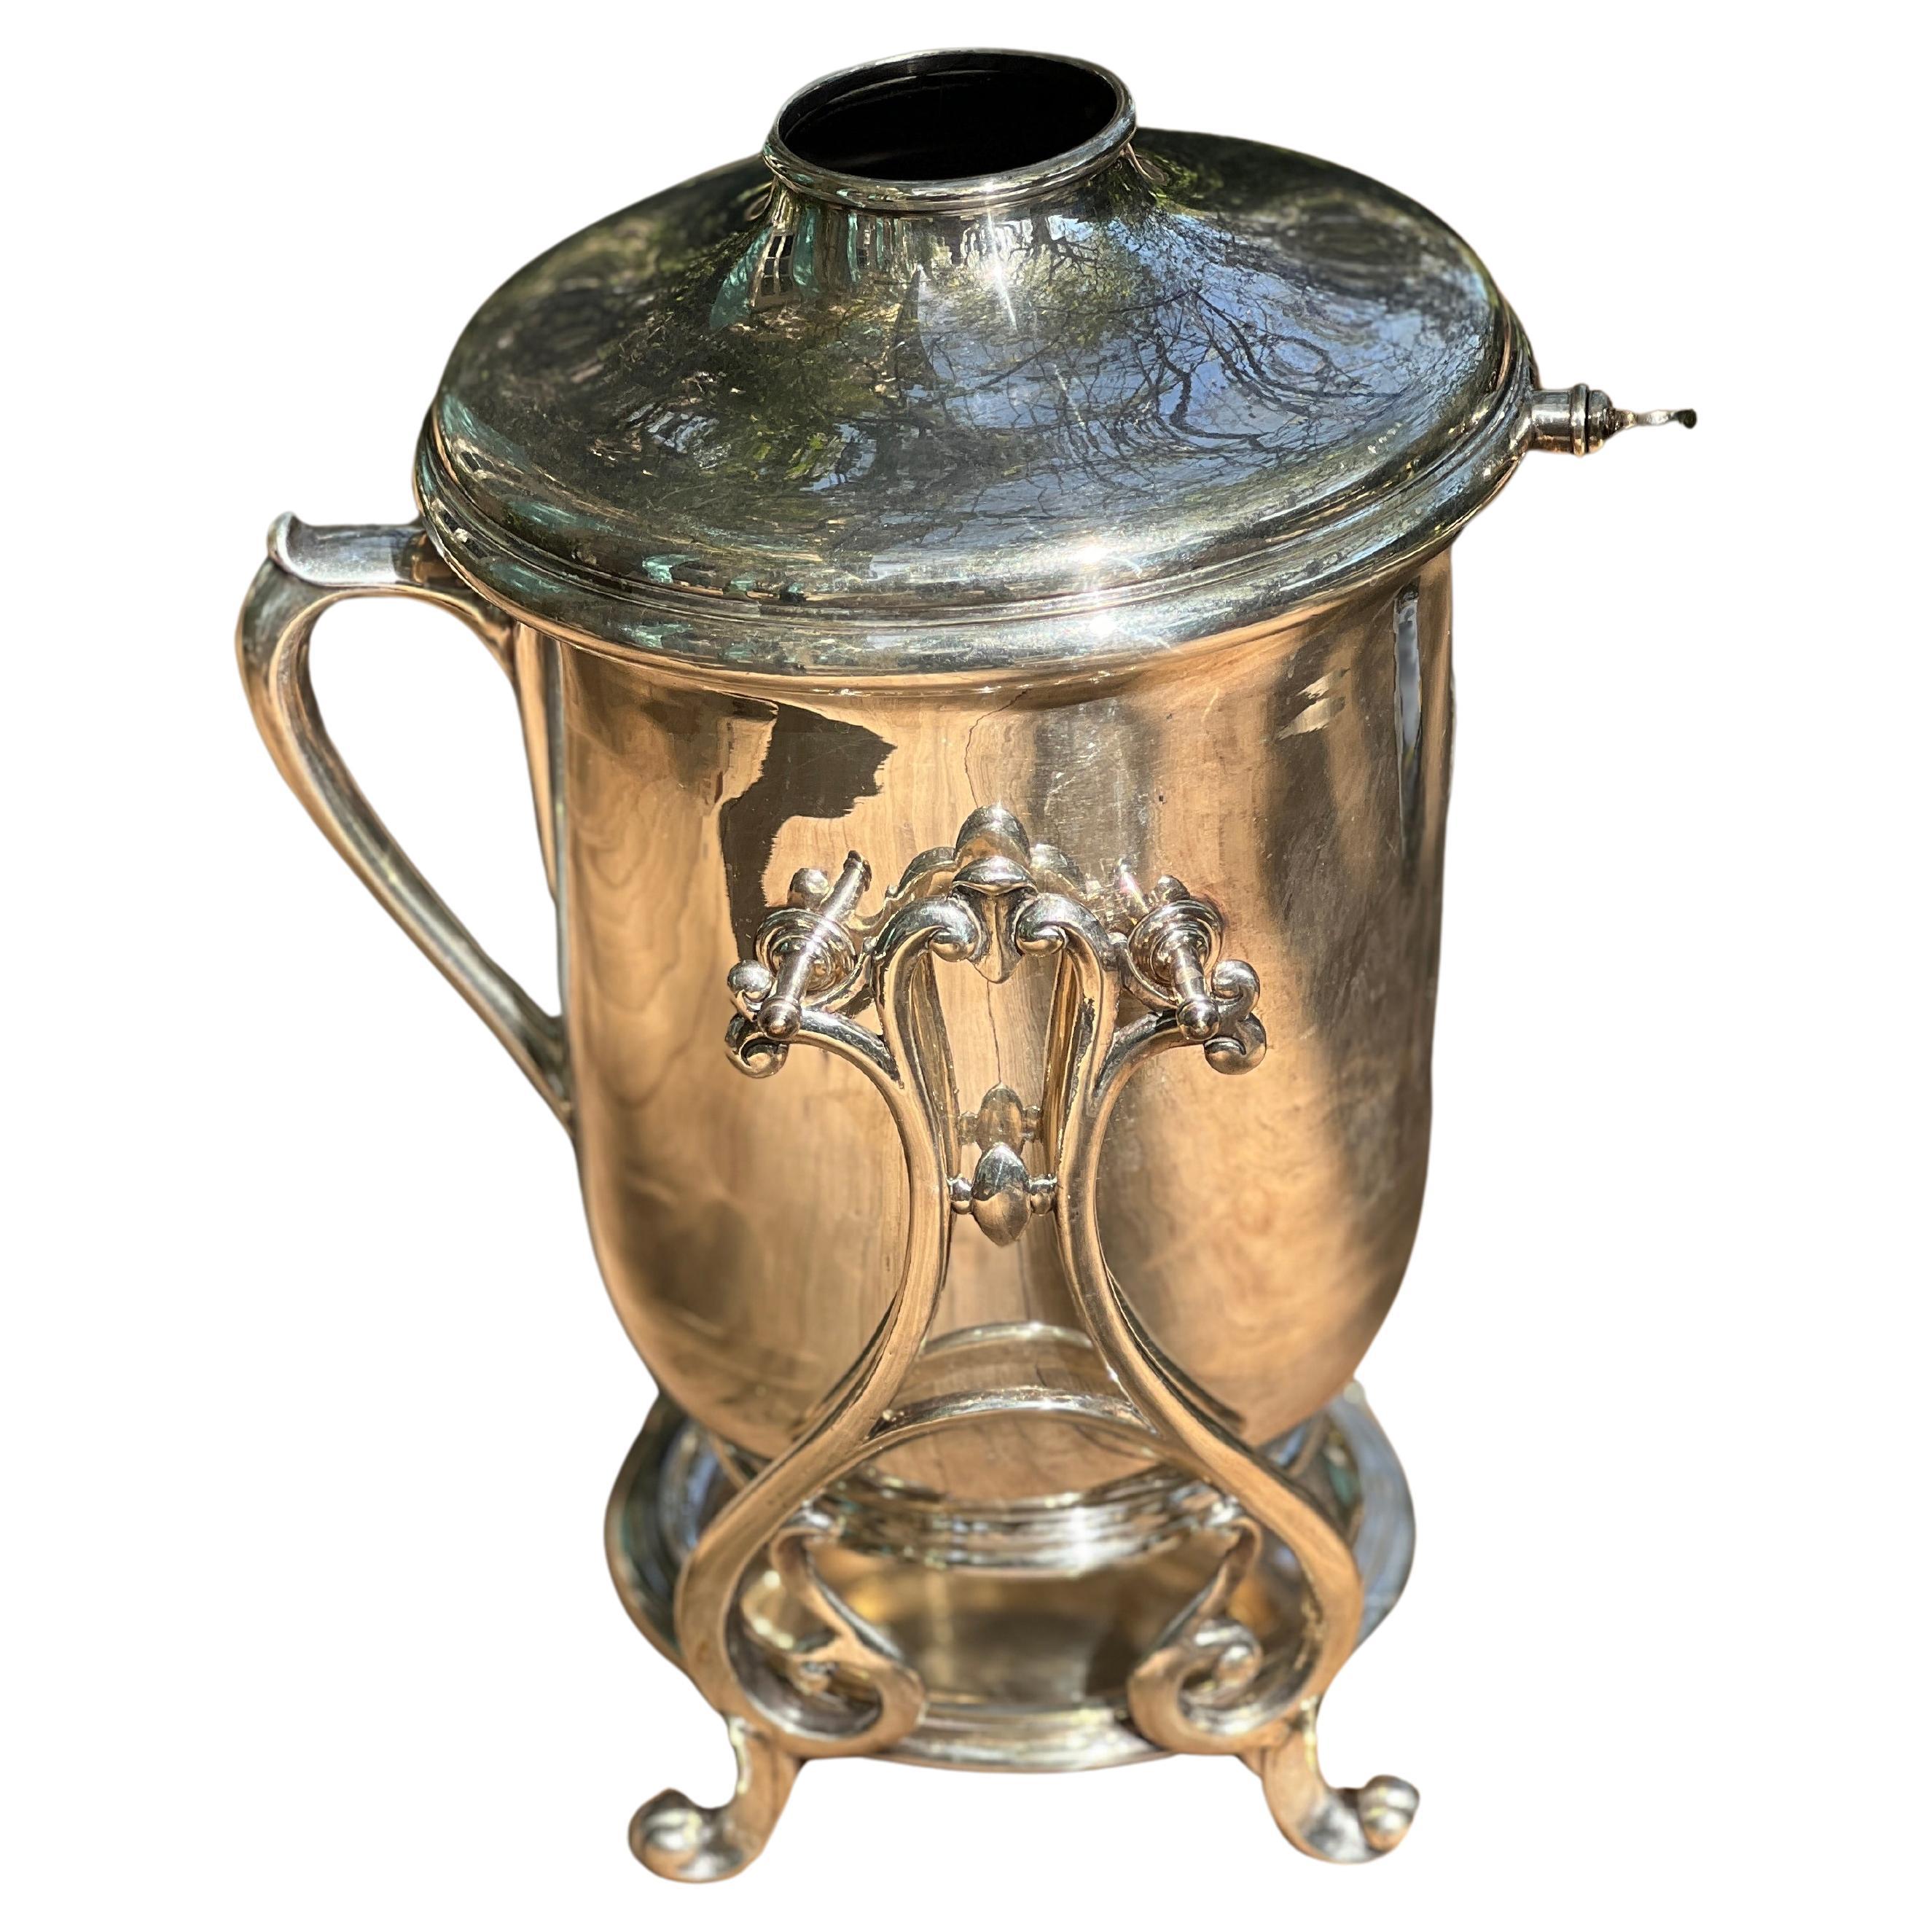 Christofle silver-plated wine and champagne cooler with caddy circa 1935